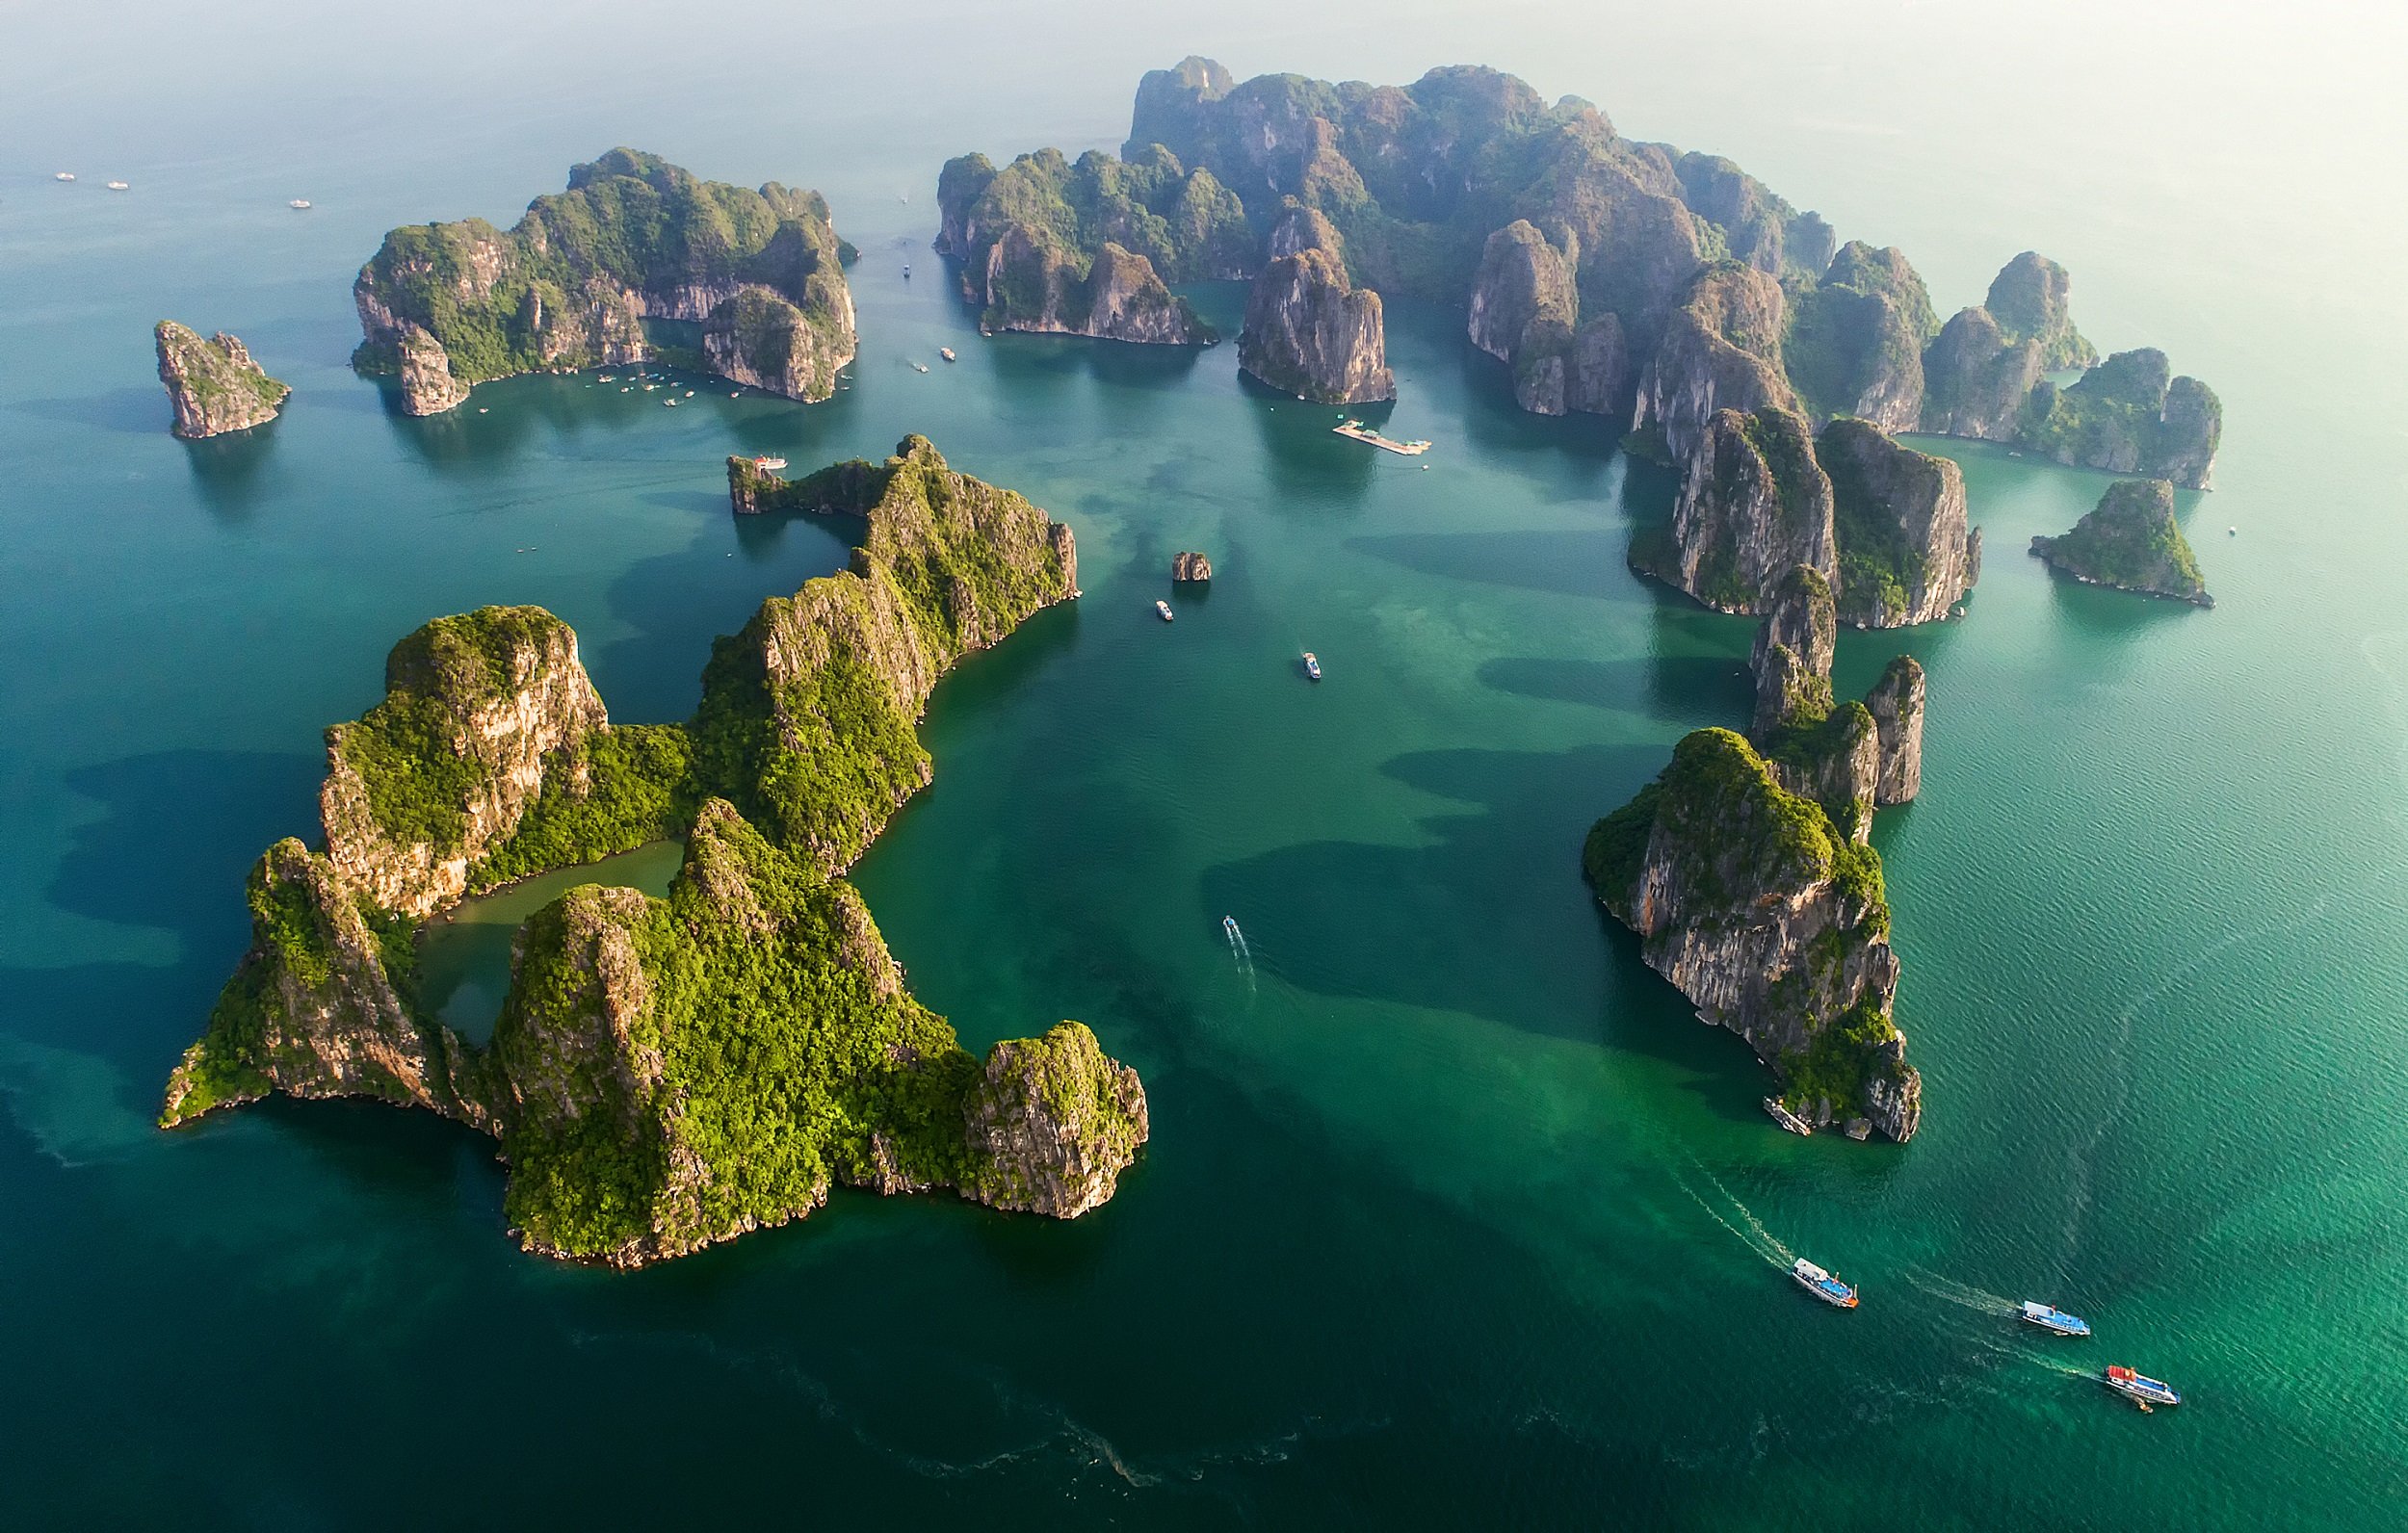 The Halong Bay Cruise Will B A Highlight Of The Wonders Of Vietnam, Cambodia & Thailand 15 Day Package Tour